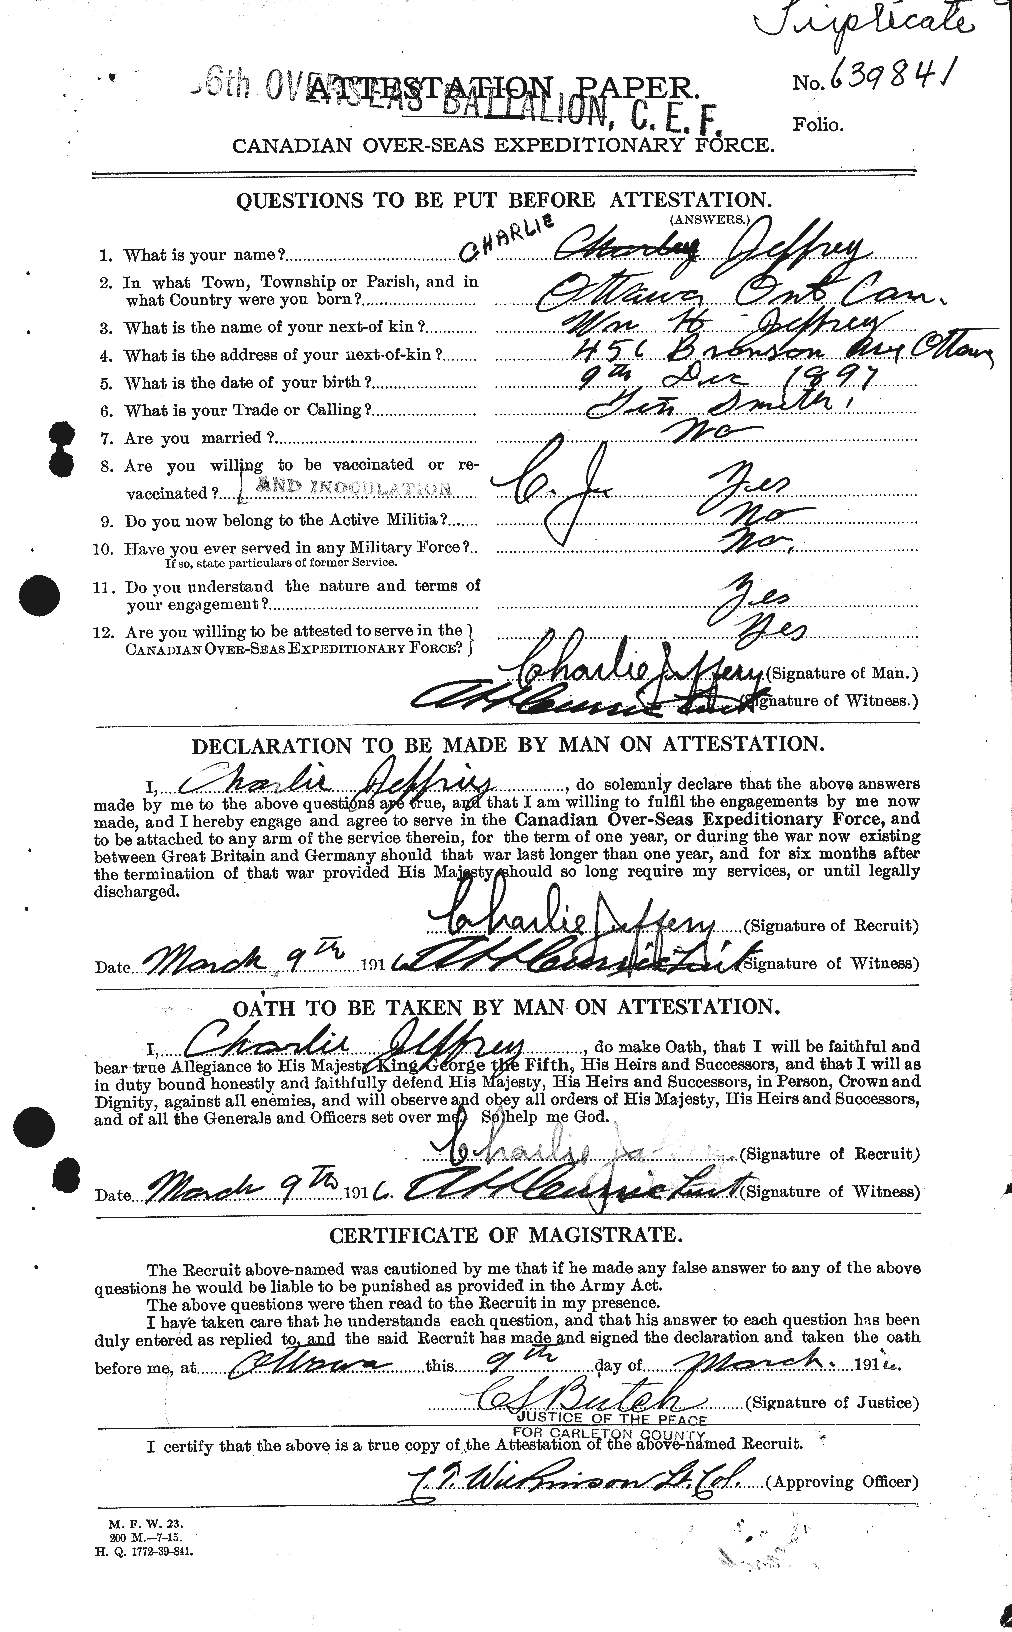 Personnel Records of the First World War - CEF 417860a